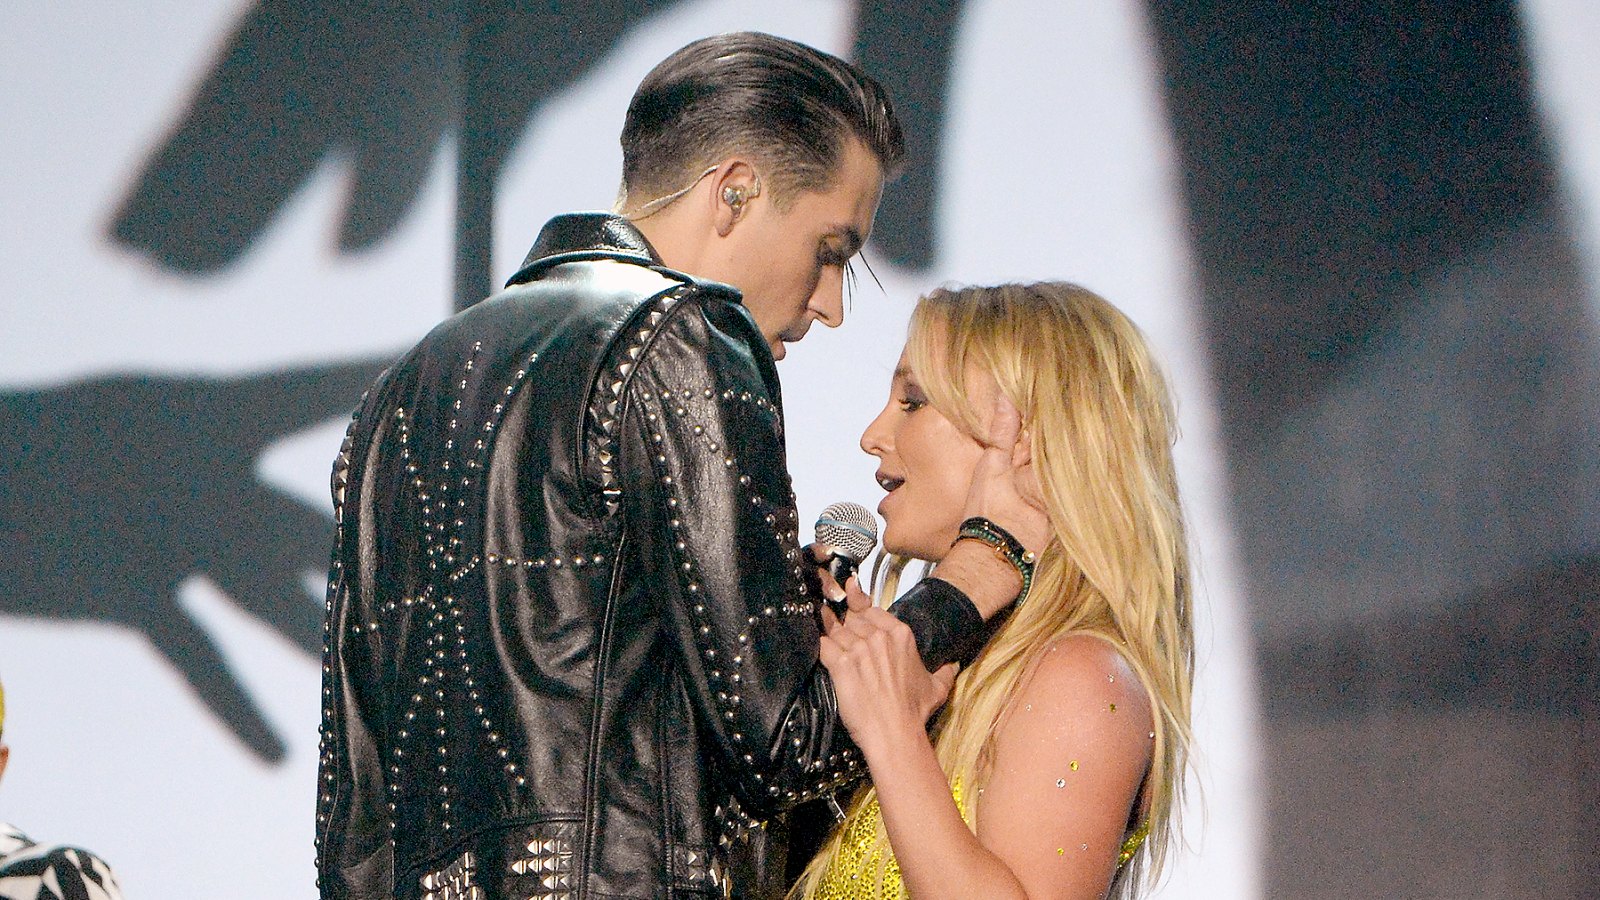 Britney Spears and G-Eazy perform onstage during the 2016 MTV Music Video Awards.